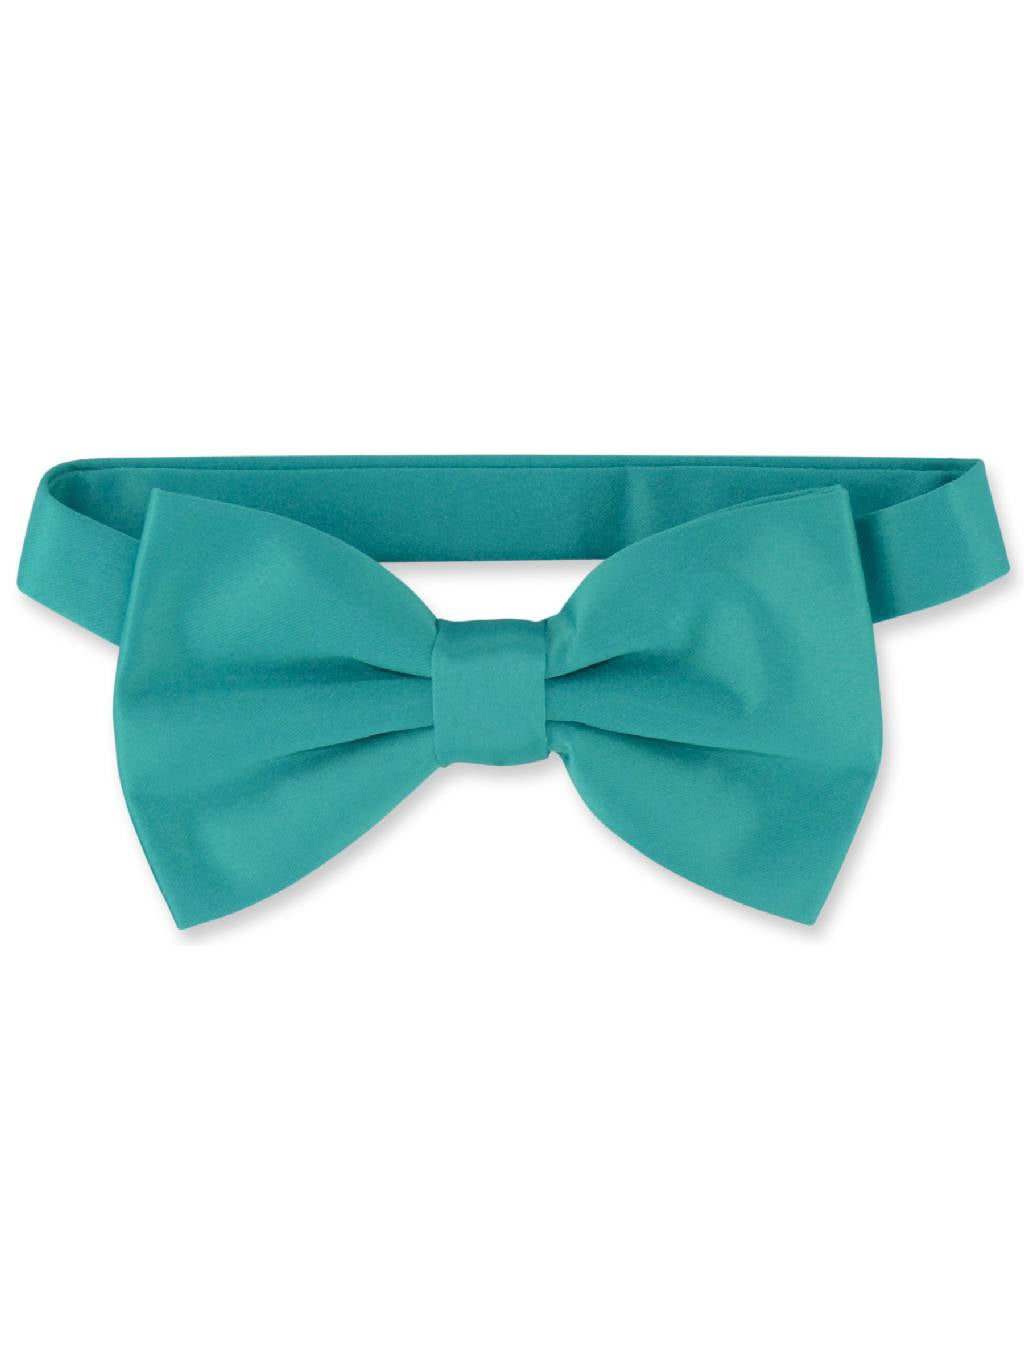 Classic Ink Blue Bow Tie for kids and men